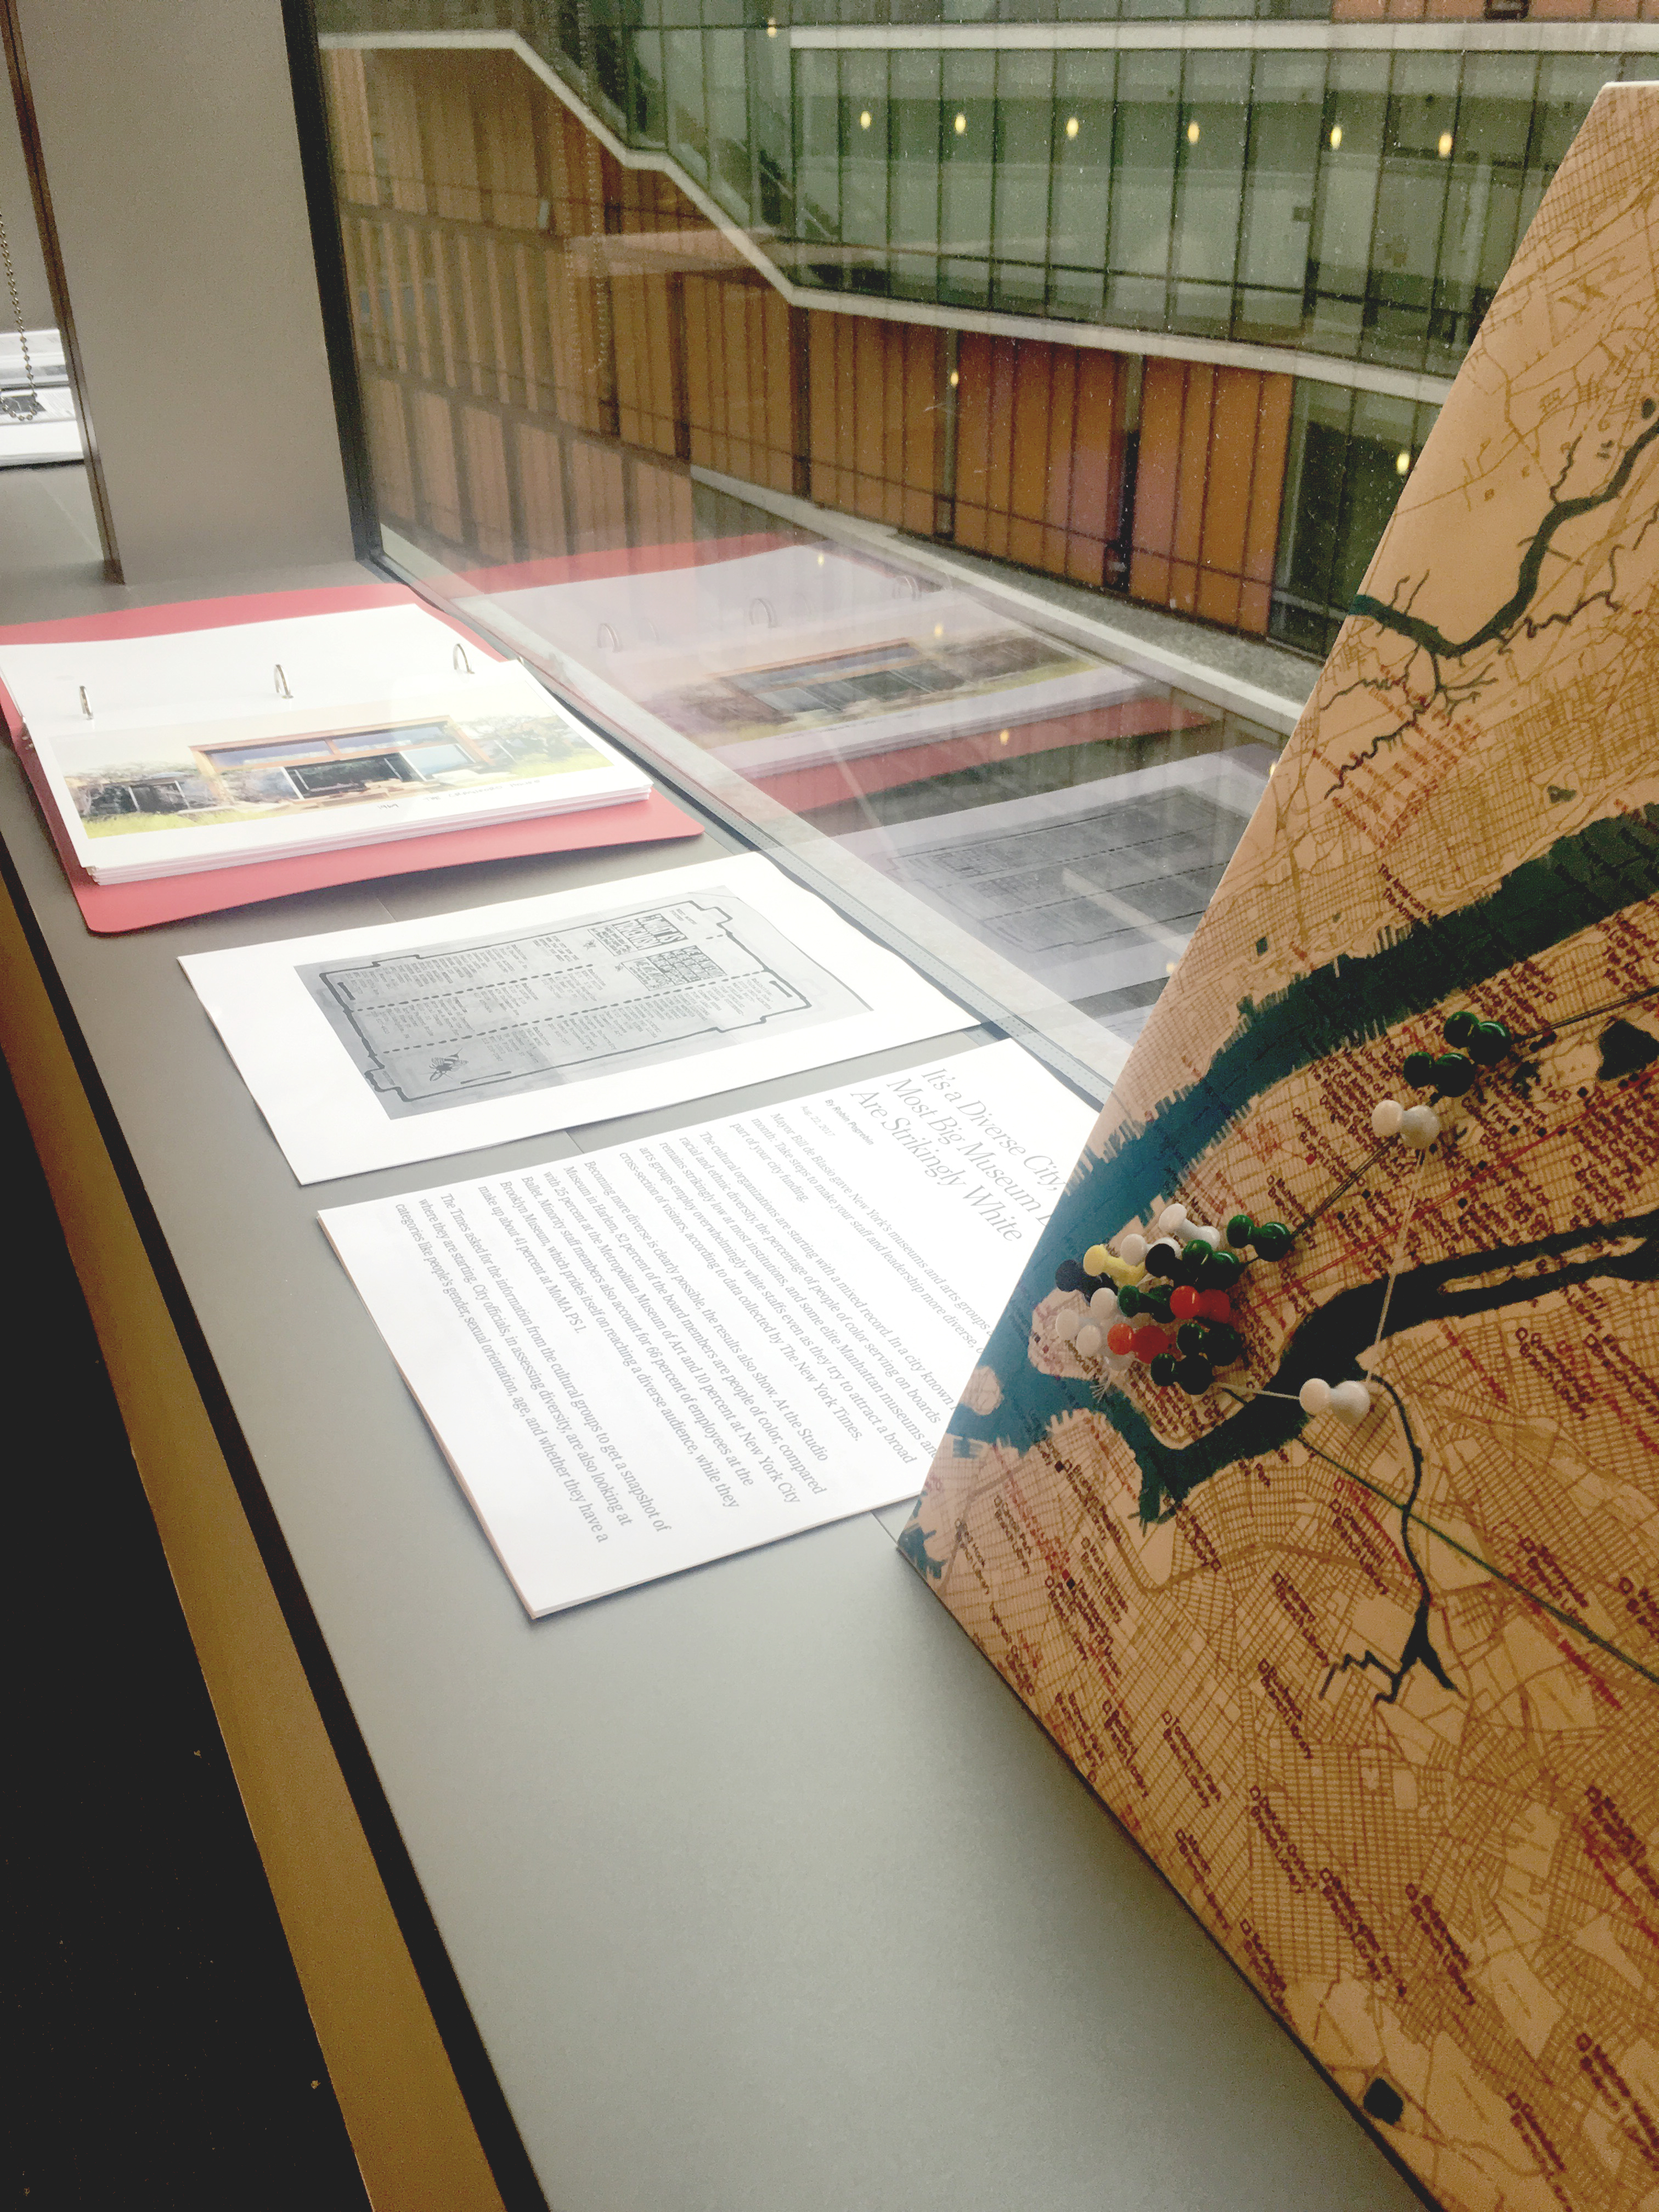 Materials from Professor Siddiqi's class are laid out on a window sill, available for the exhibit's visitors to peruse.